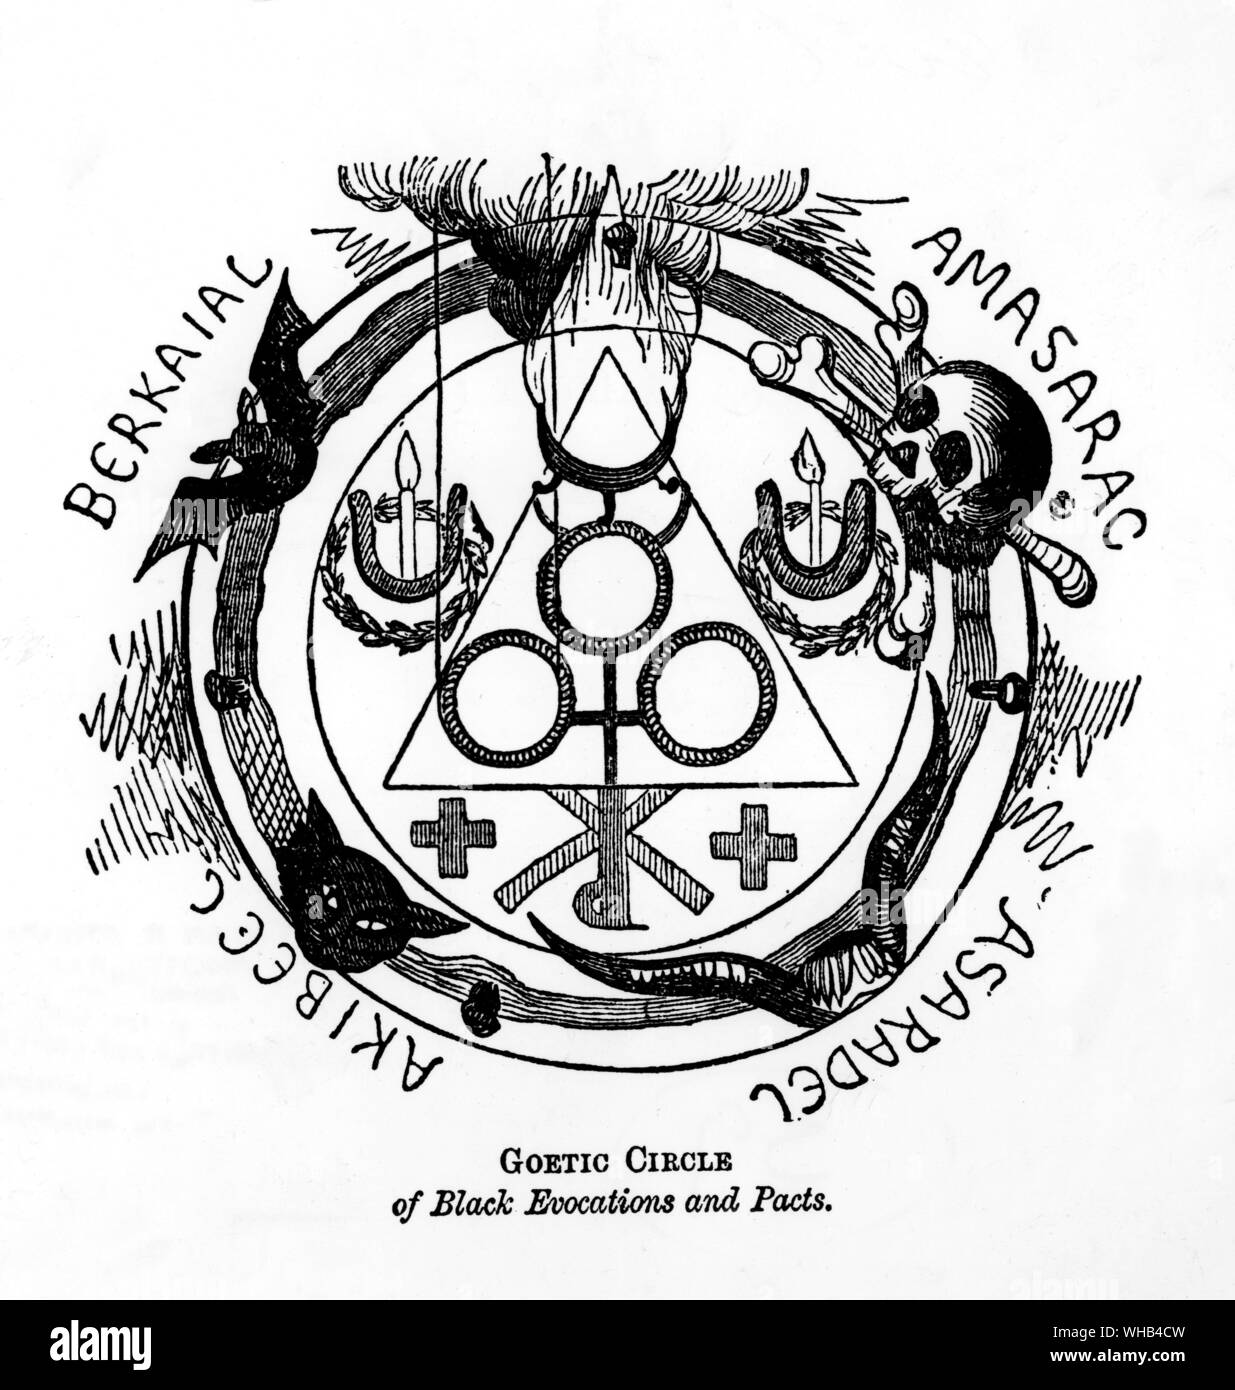 Goetic circle (or sorcerous circle) used for black evocations and pacts from Transcendental Magic - Its Doctorine and Ritual by Eliphas Levi.. Stock Photo